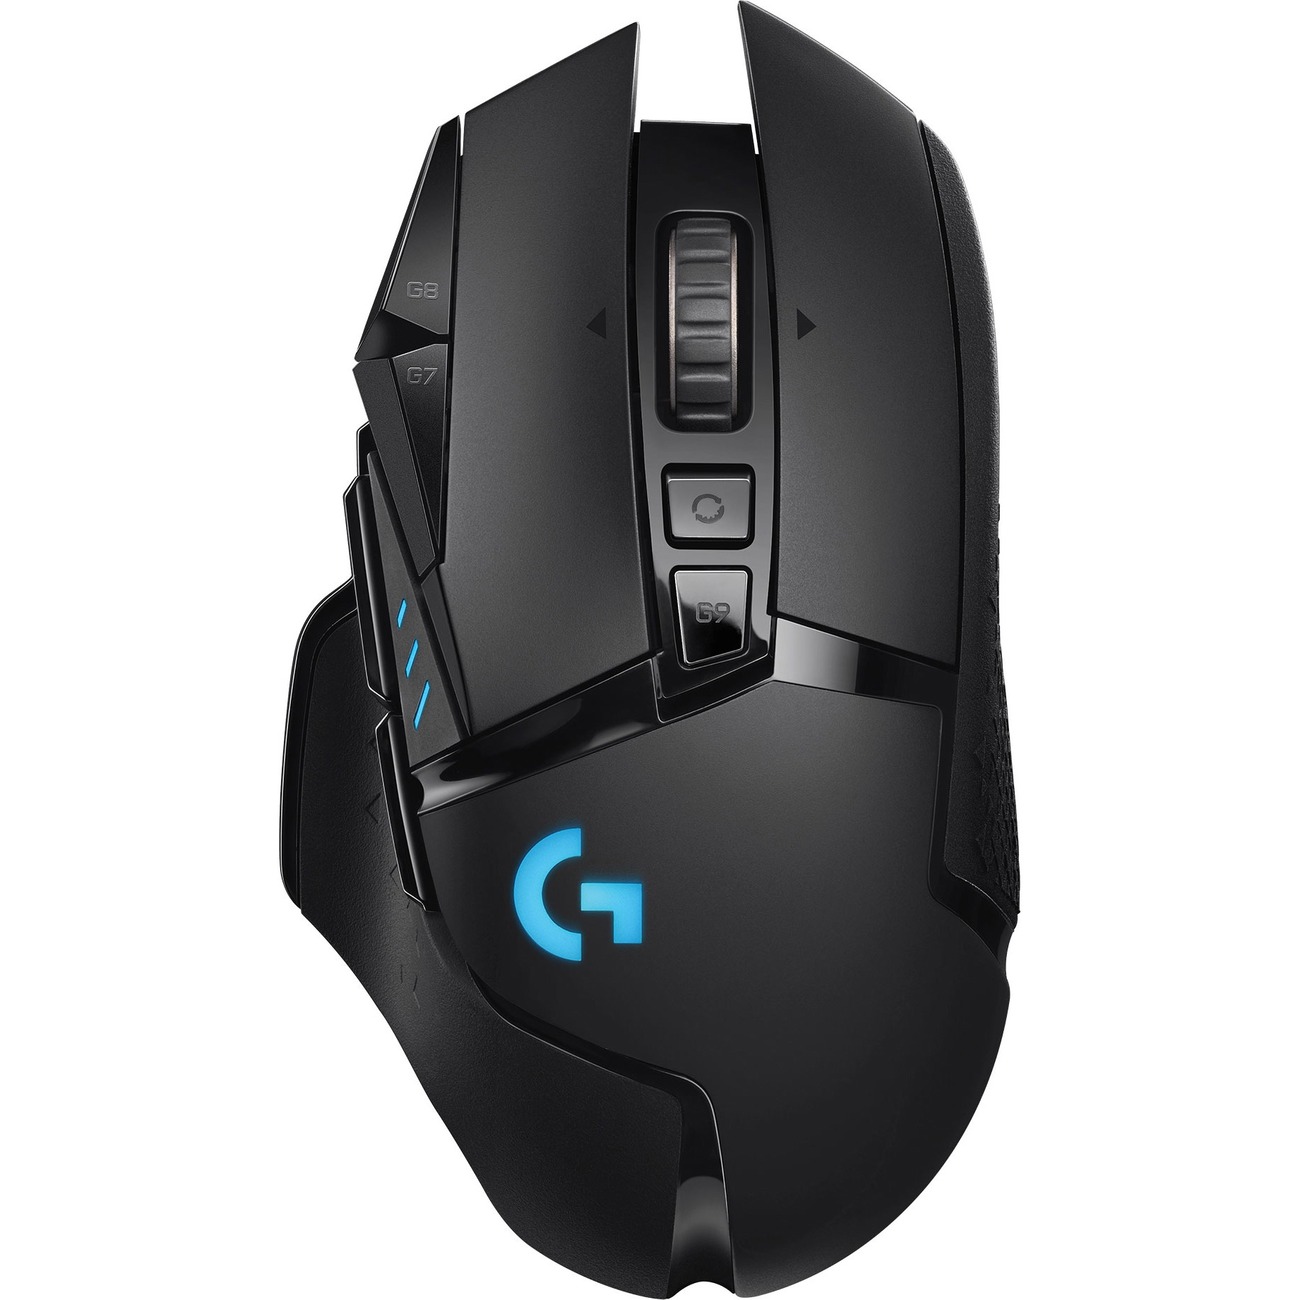 Logitech G502 X Gaming Mouse Lightsync RGB Mechanical Wired Mice 25600dpi  Adjustable 13 Buttons for Computer Laptop